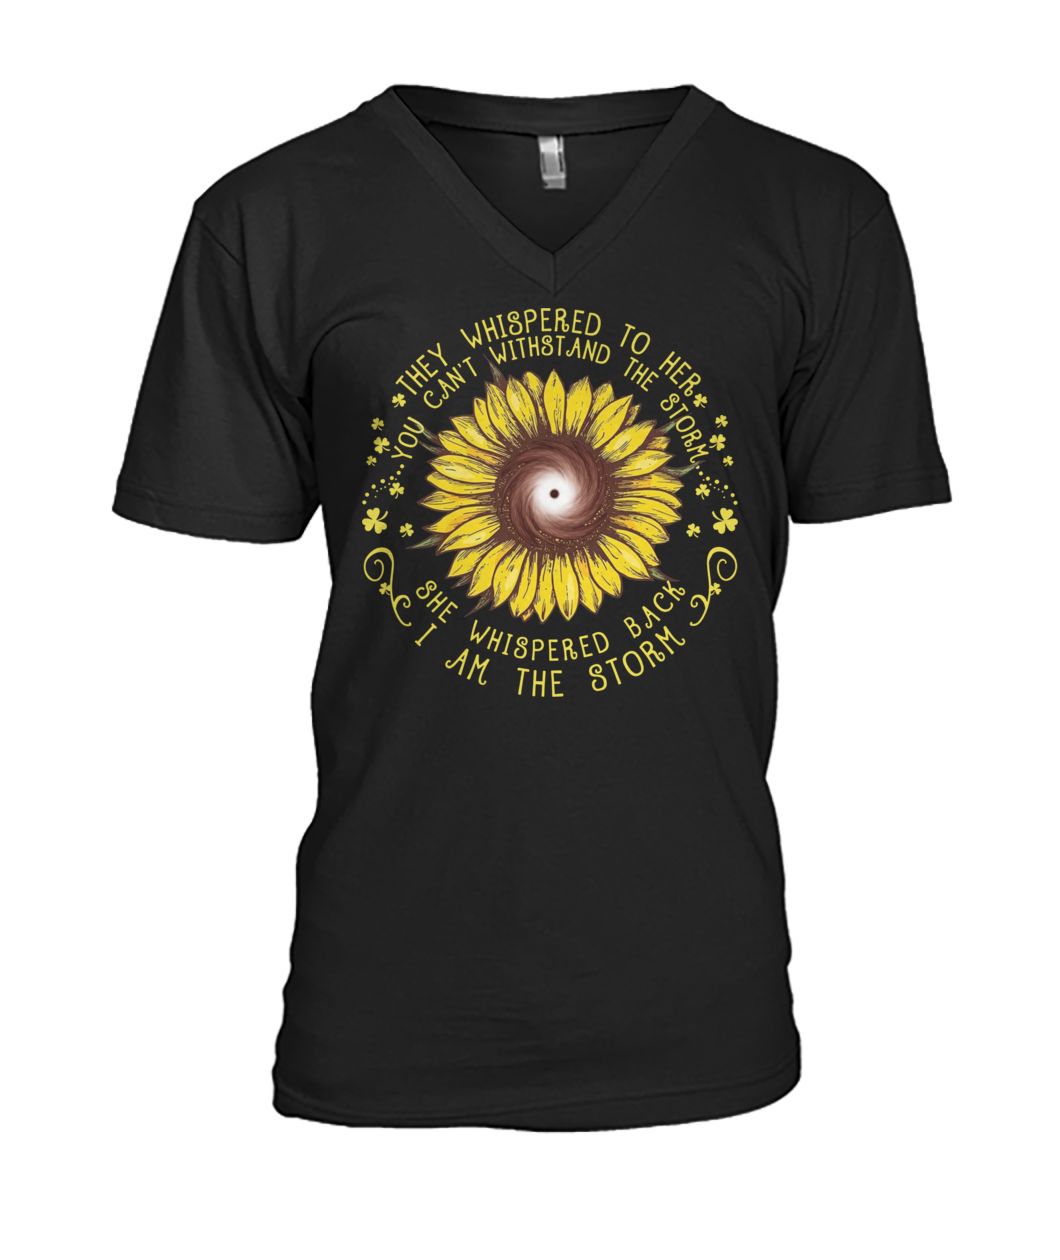 Sunflower they whispered to her you can't withstand the storm mens v-neck